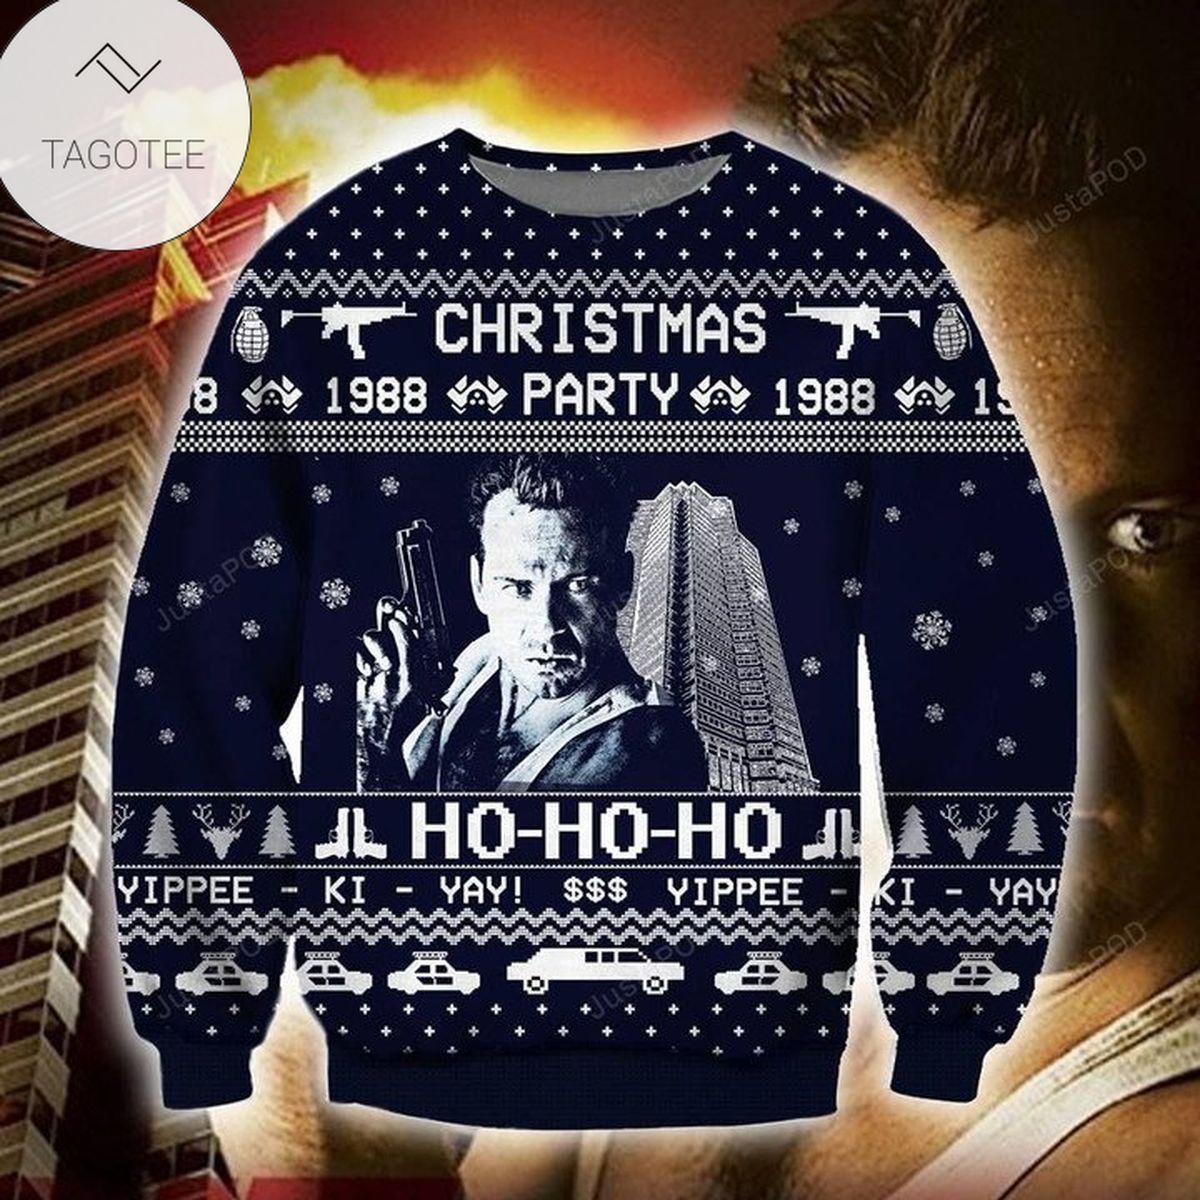 Die Hard KNITTING PATTERN 3D PRINT UGLY CHRISTMAS SWEATER